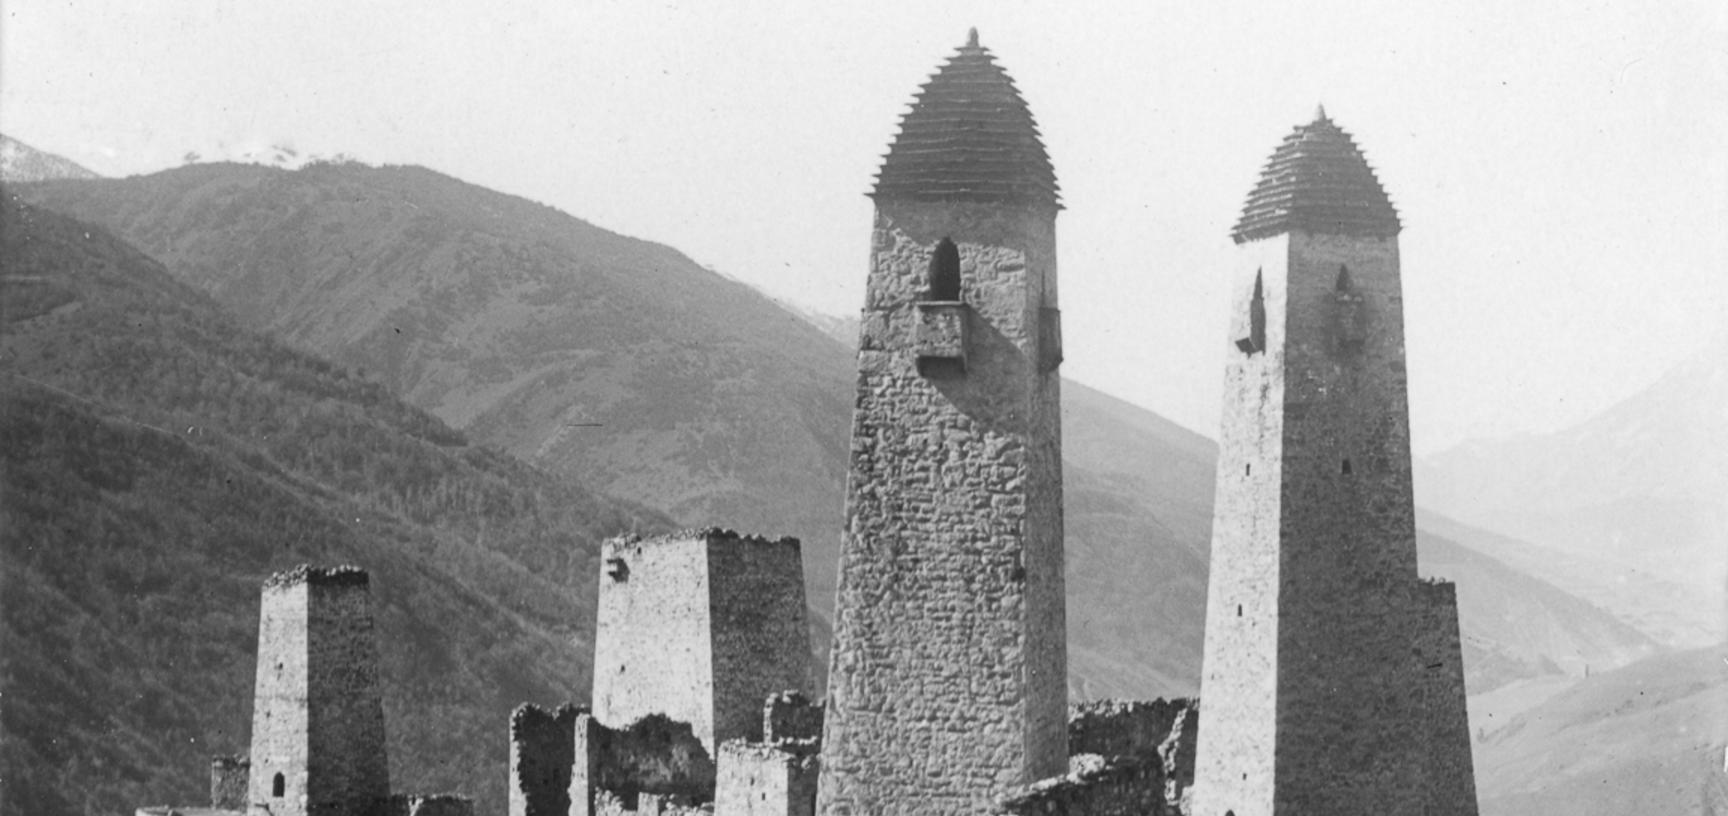 Look-out and refuge towers in Arzee. Similar towers were built all over the eastern Caucasus, though few remain today. Photograph by John Baddeley. Arzee, Russia. October 1901.